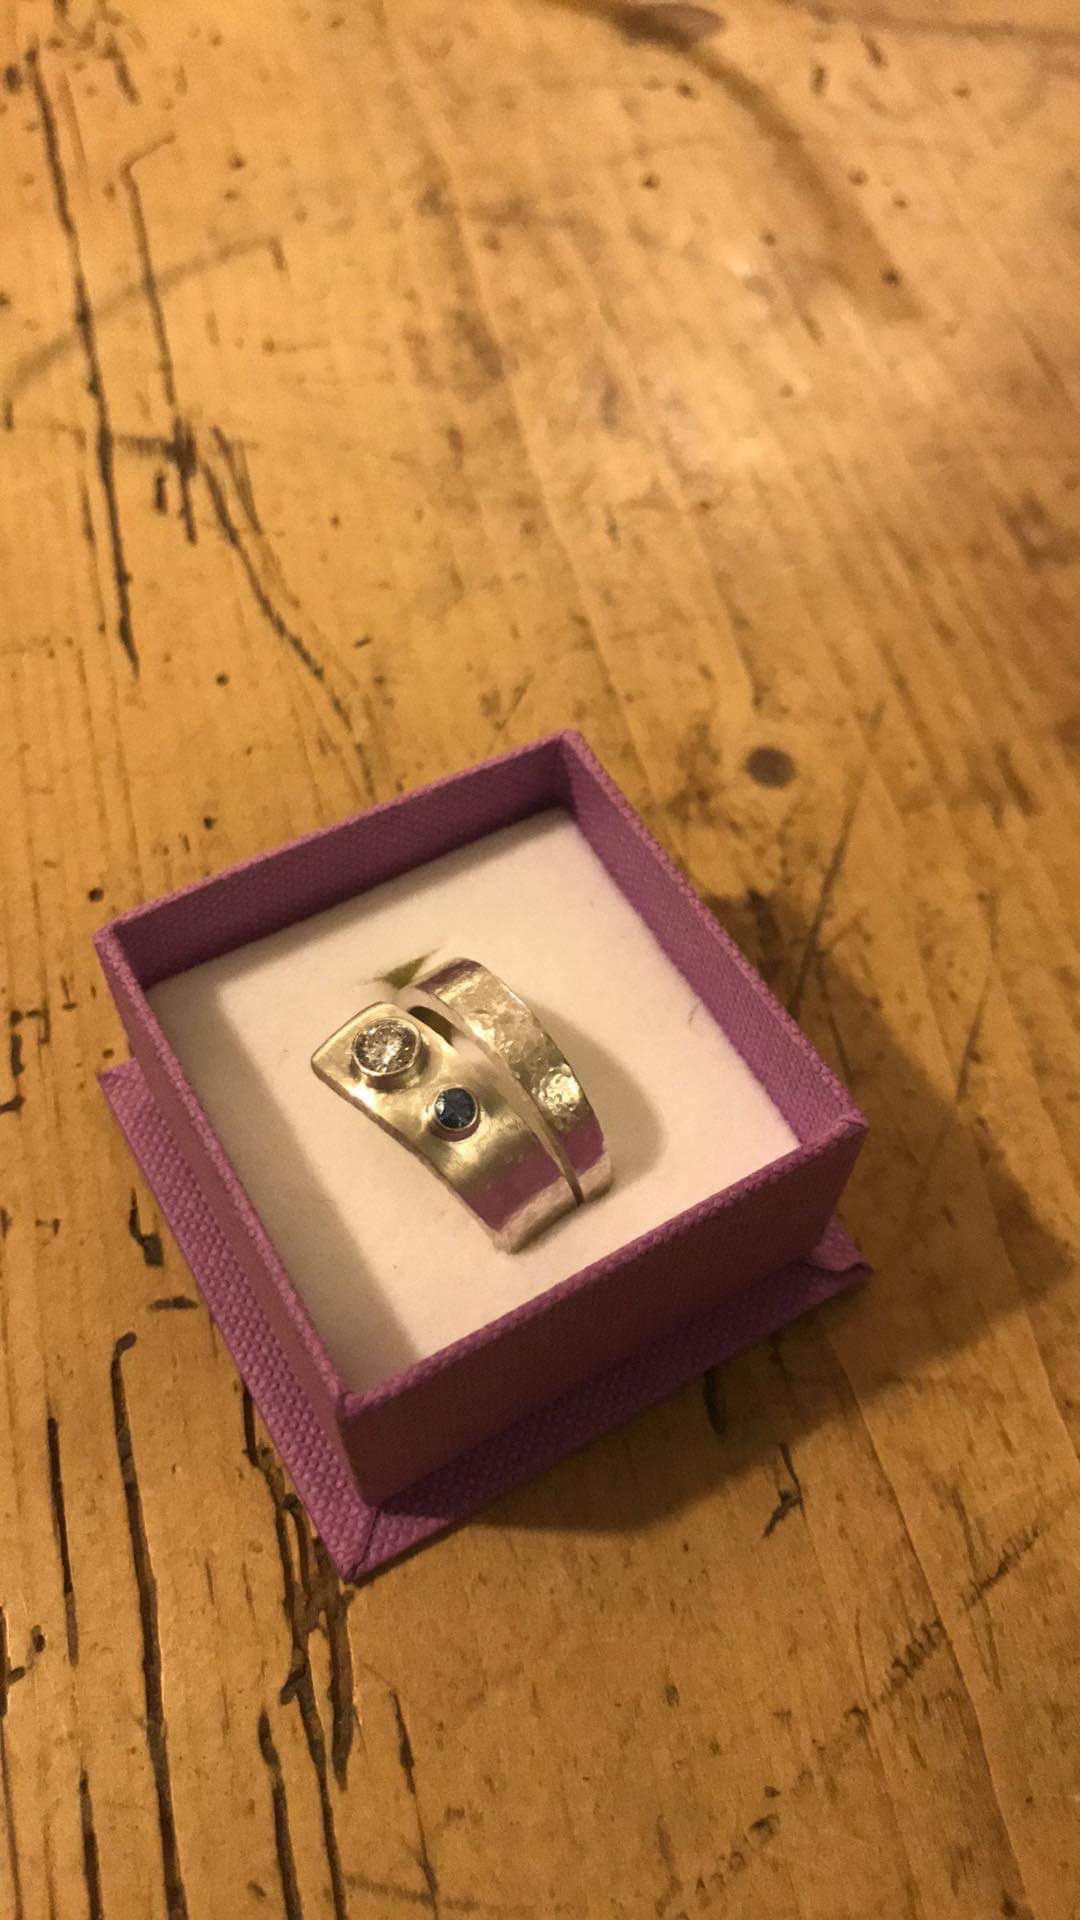 the finished ring